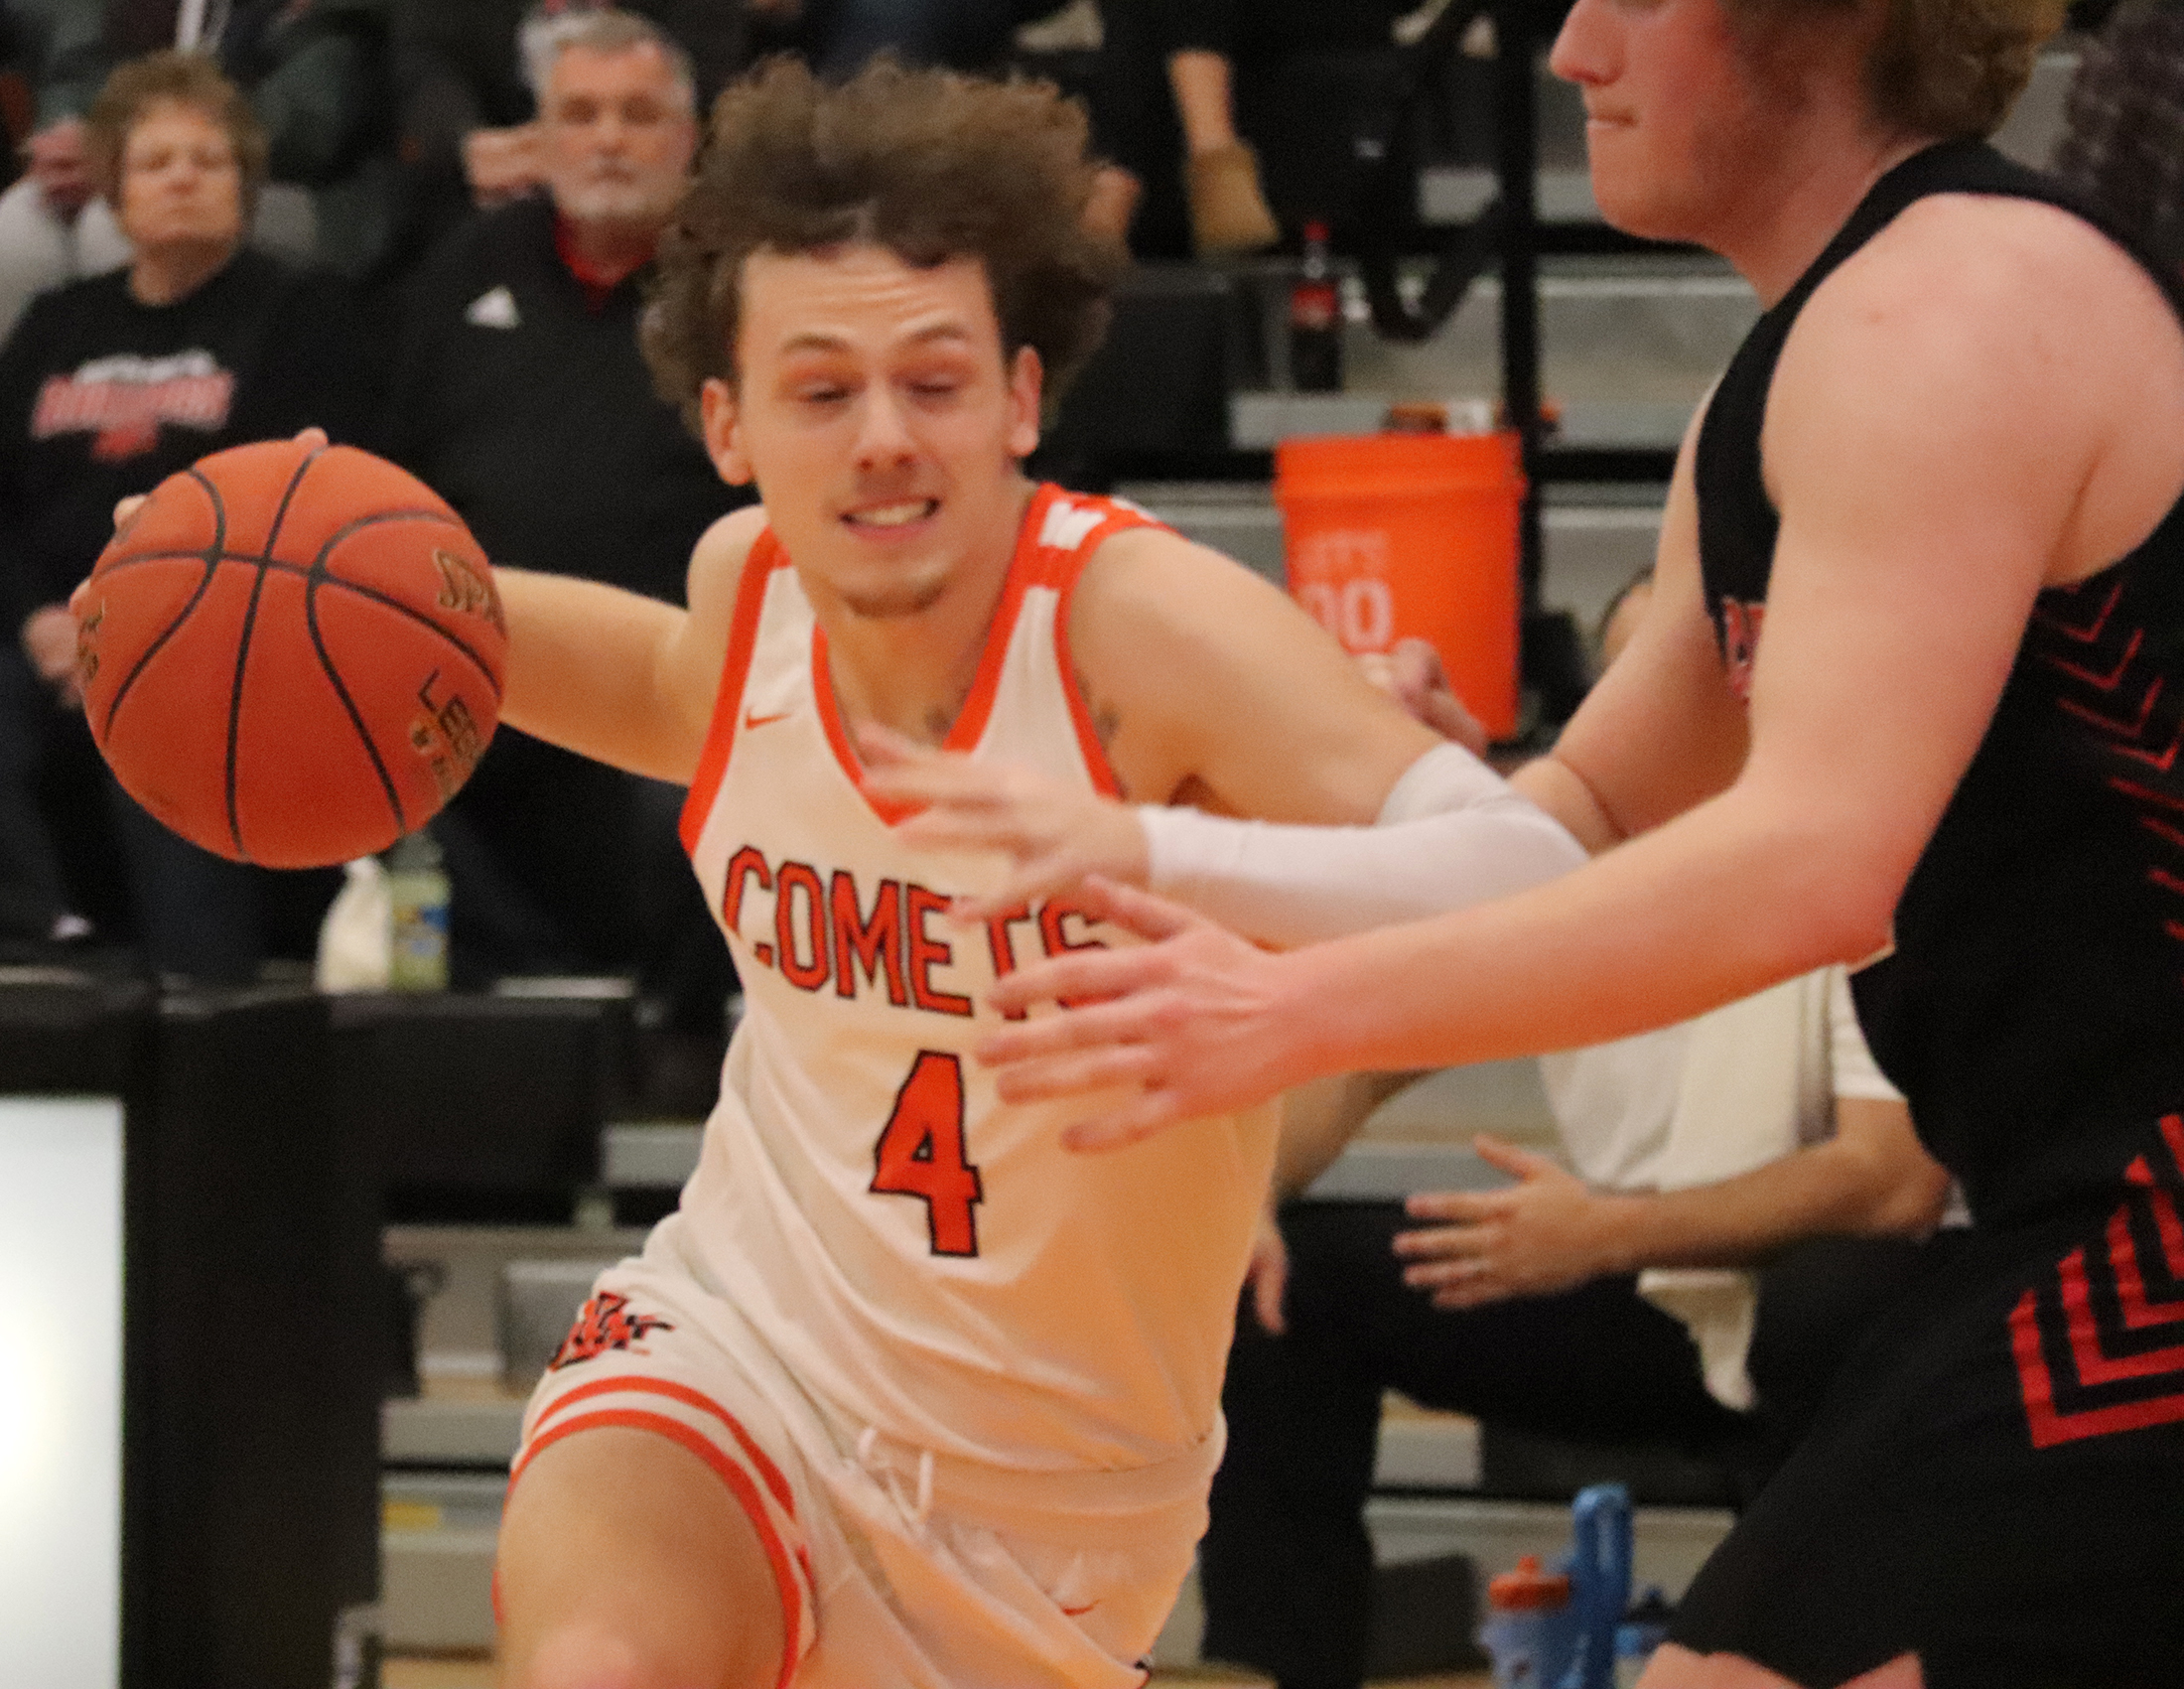 Comets ‘pound’ Bulldogs 49-38 in substate semis, to face No. 1-ranked Decorah in final on Monday